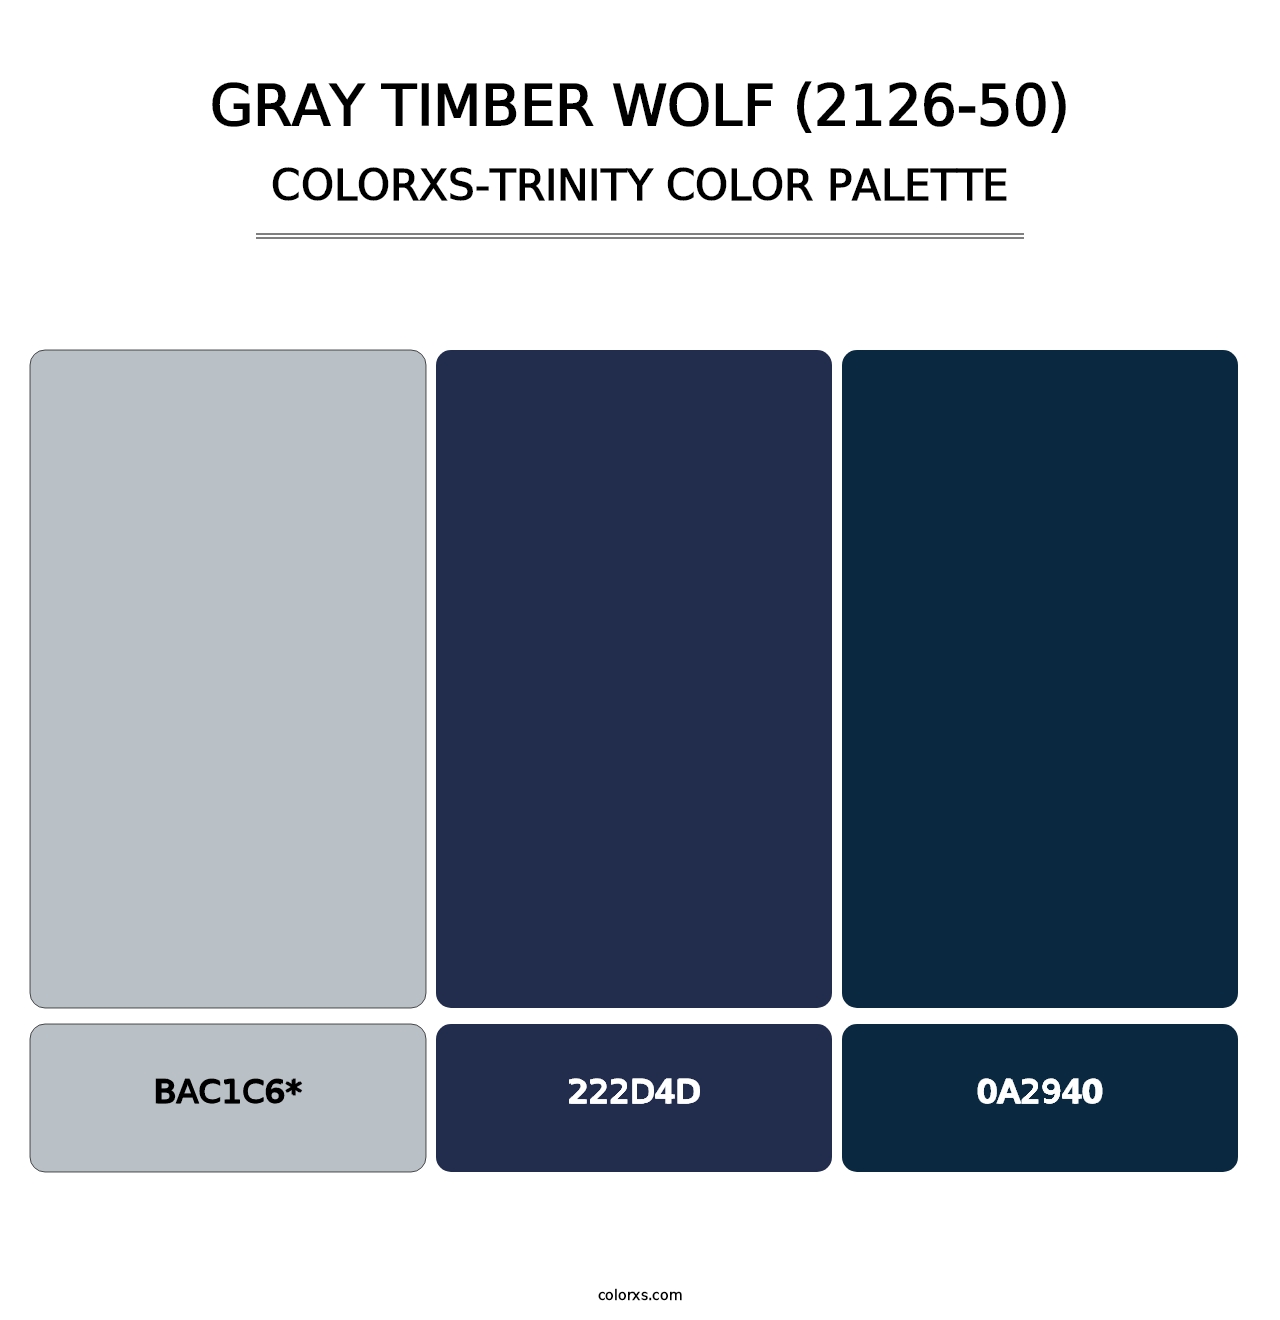 Gray Timber Wolf (2126-50) - Colorxs Trinity Palette